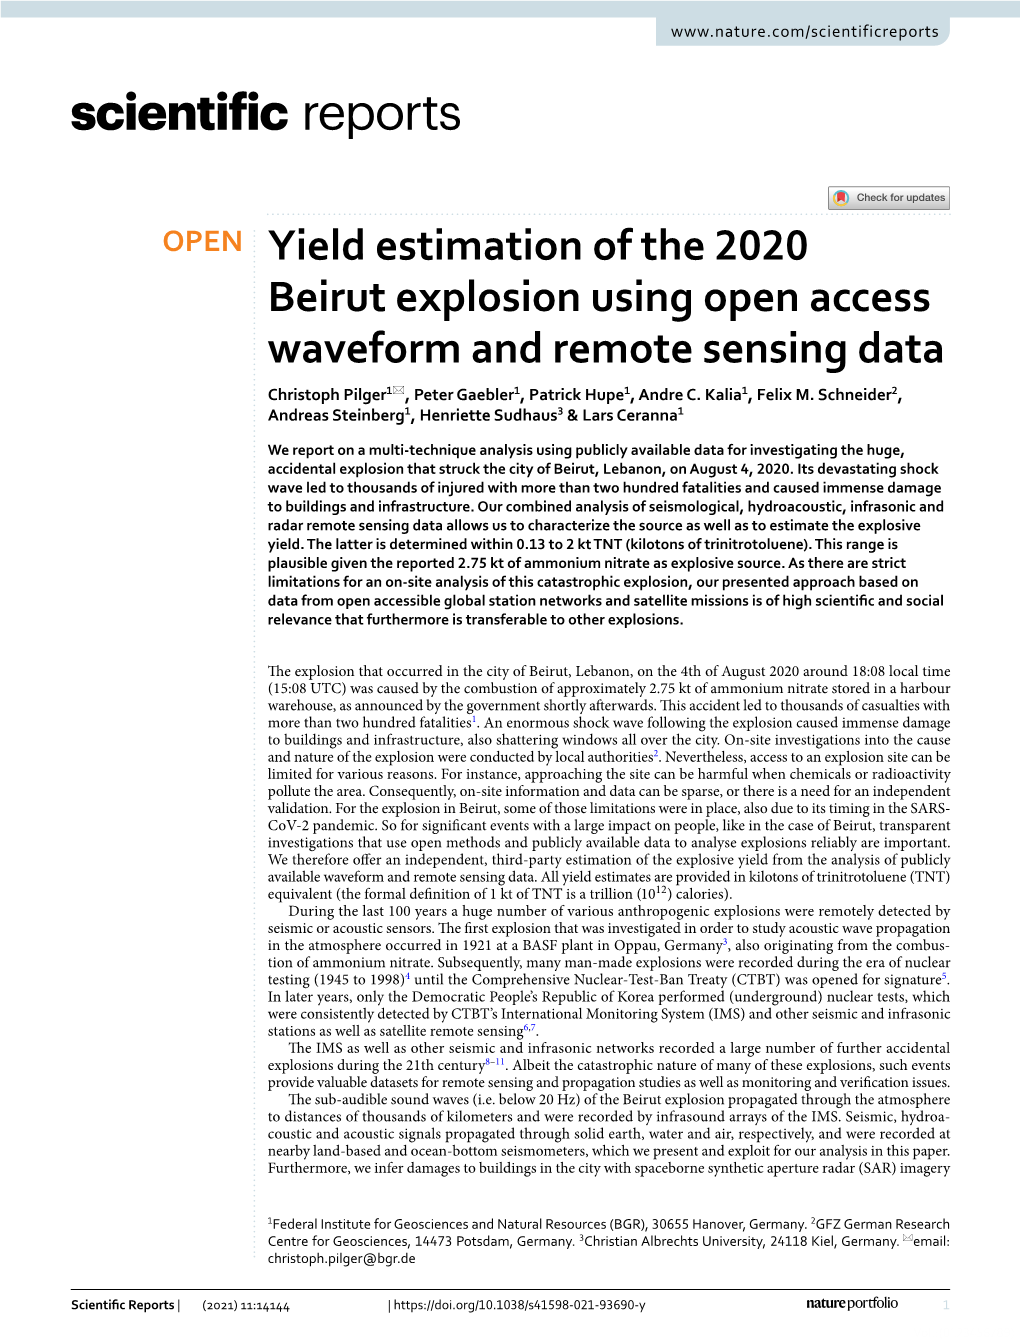 Yield Estimation of the 2020 Beirut Explosion Using Open Access Waveform and Remote Sensing Data Christoph Pilger1*, Peter Gaebler1, Patrick Hupe1, Andre C